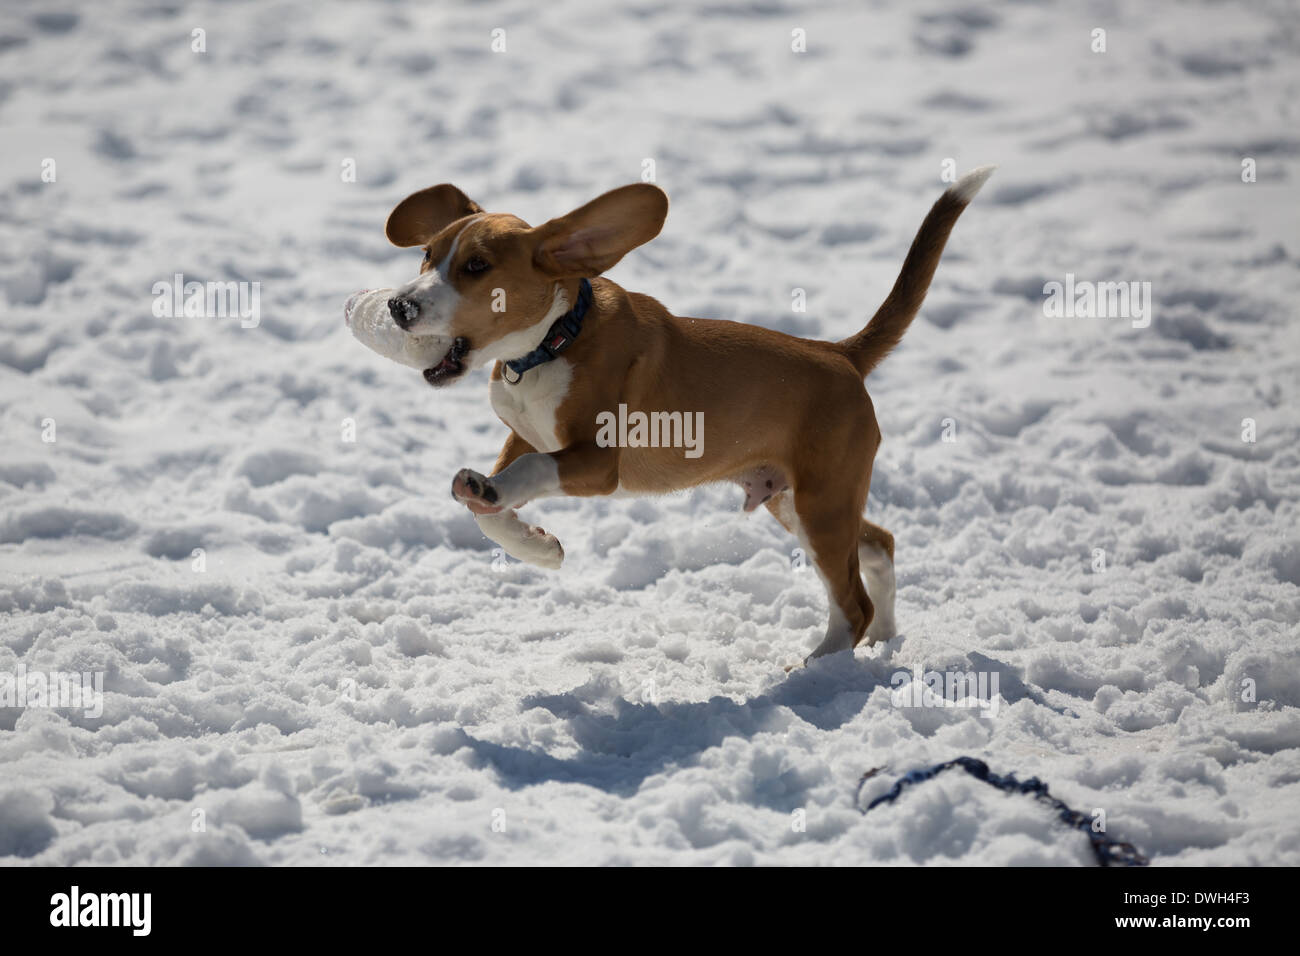 A brown and white 5 month old beagle puppy playing in the snow. Stock Photo